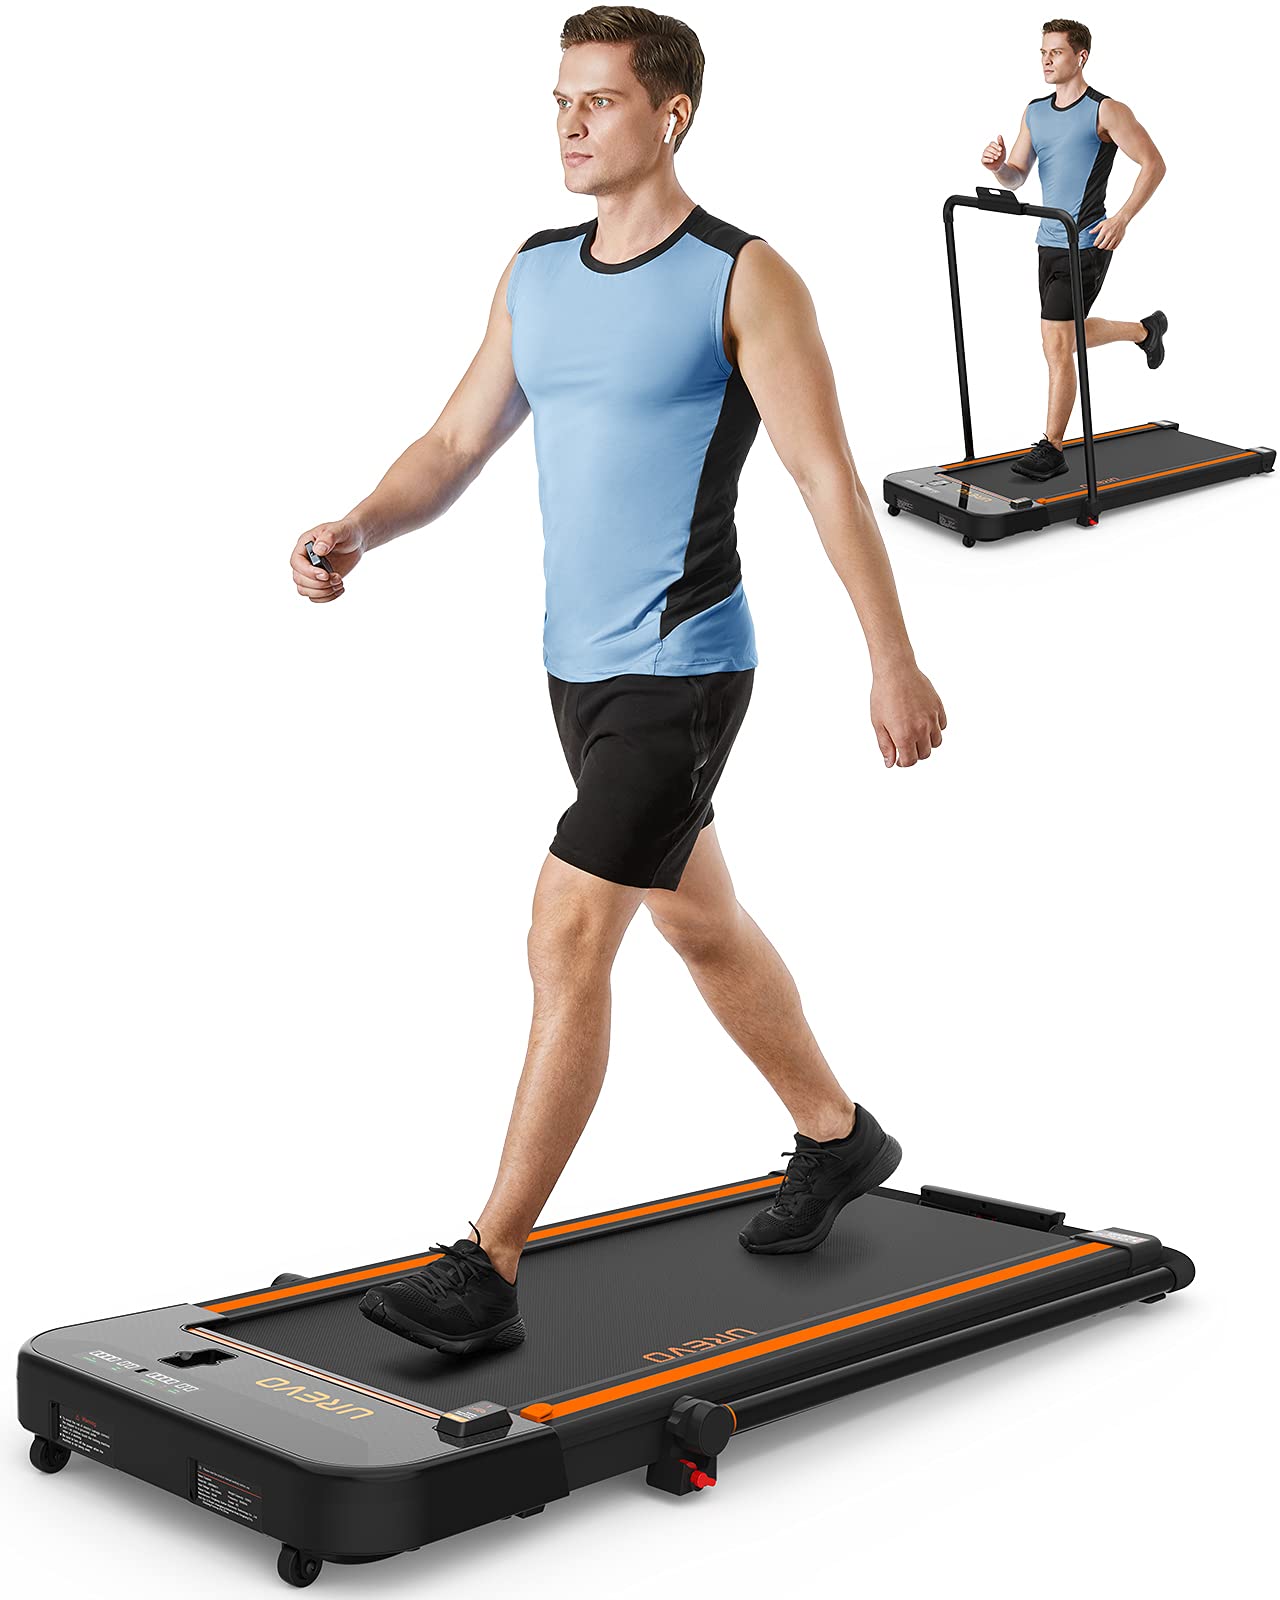 UR2.5HP Folding Electric Treadmill Walking Jogging Machine for Home Office with Remote Control Black